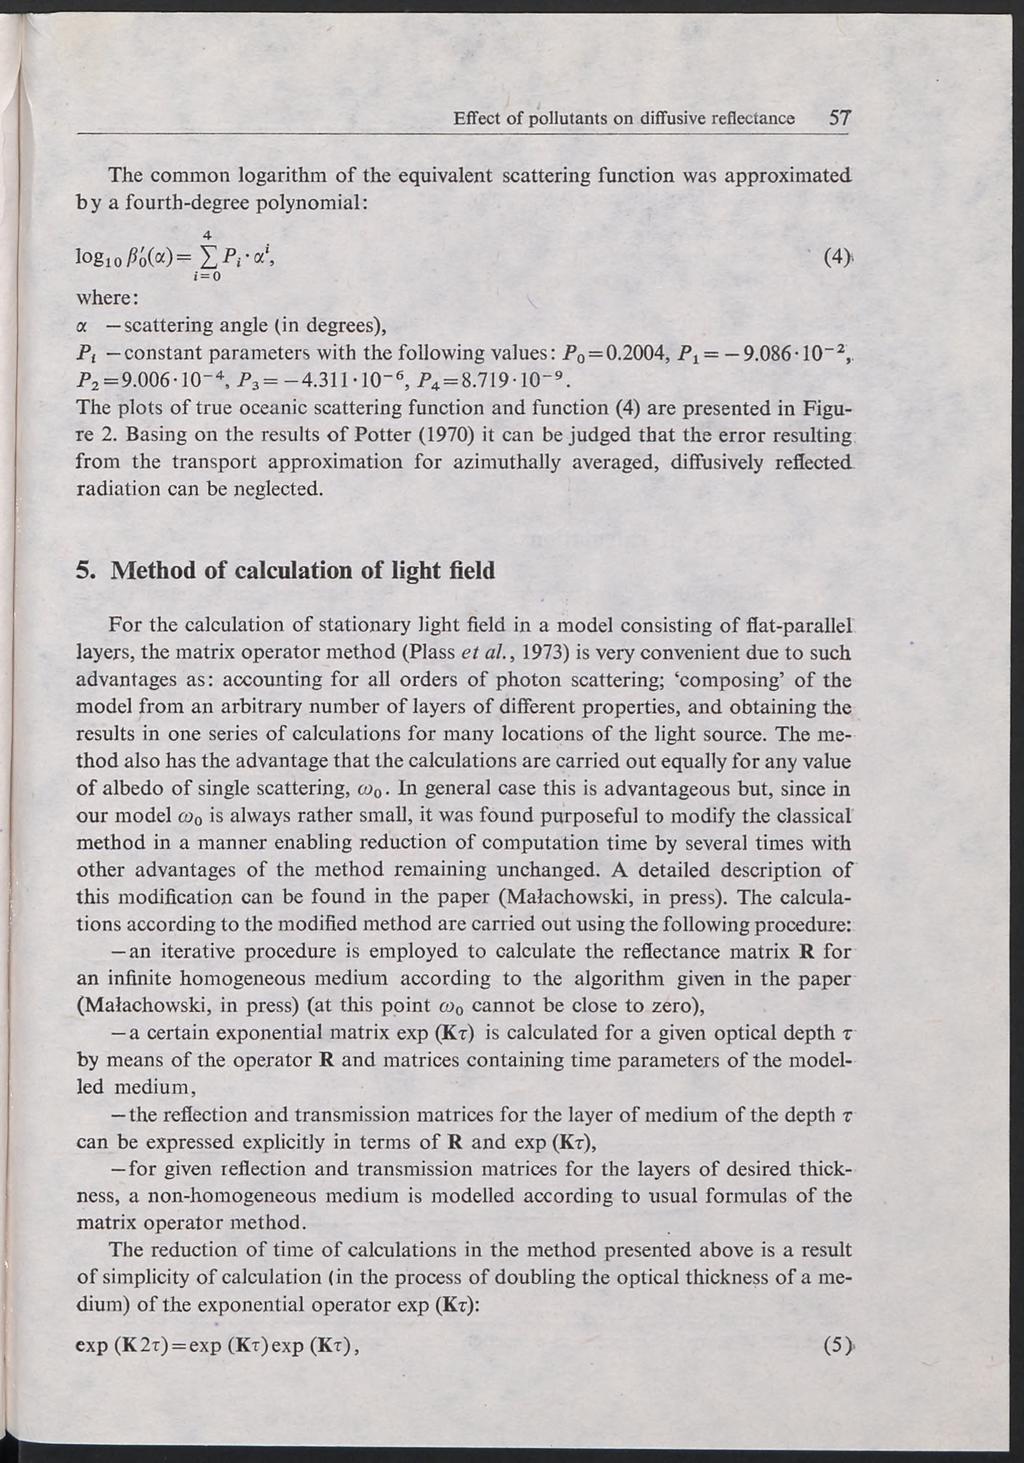 The com m on logarithm o f the equivalent scattering function was approxim ated b y a fourth-degree polynom ial: l g 10 $>(<*)= (4> i = 0 w here : a scattering angle (in degrees), Pi constant param